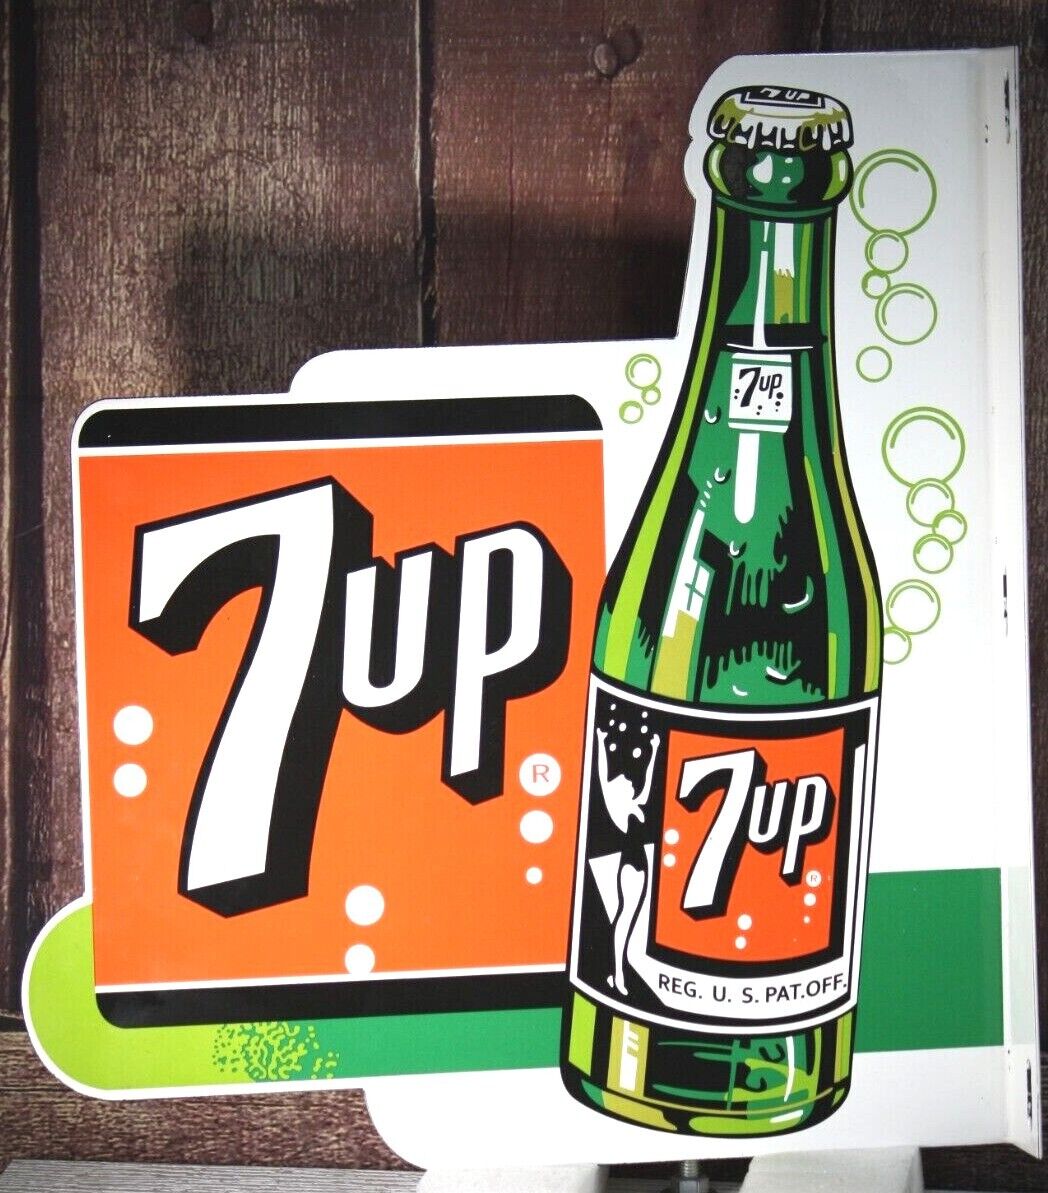 7-UP DOUBLE SIDED W/BRACKET  PORCELAIN COLLECTIBLE, RUSTIC, ADVERTISING 